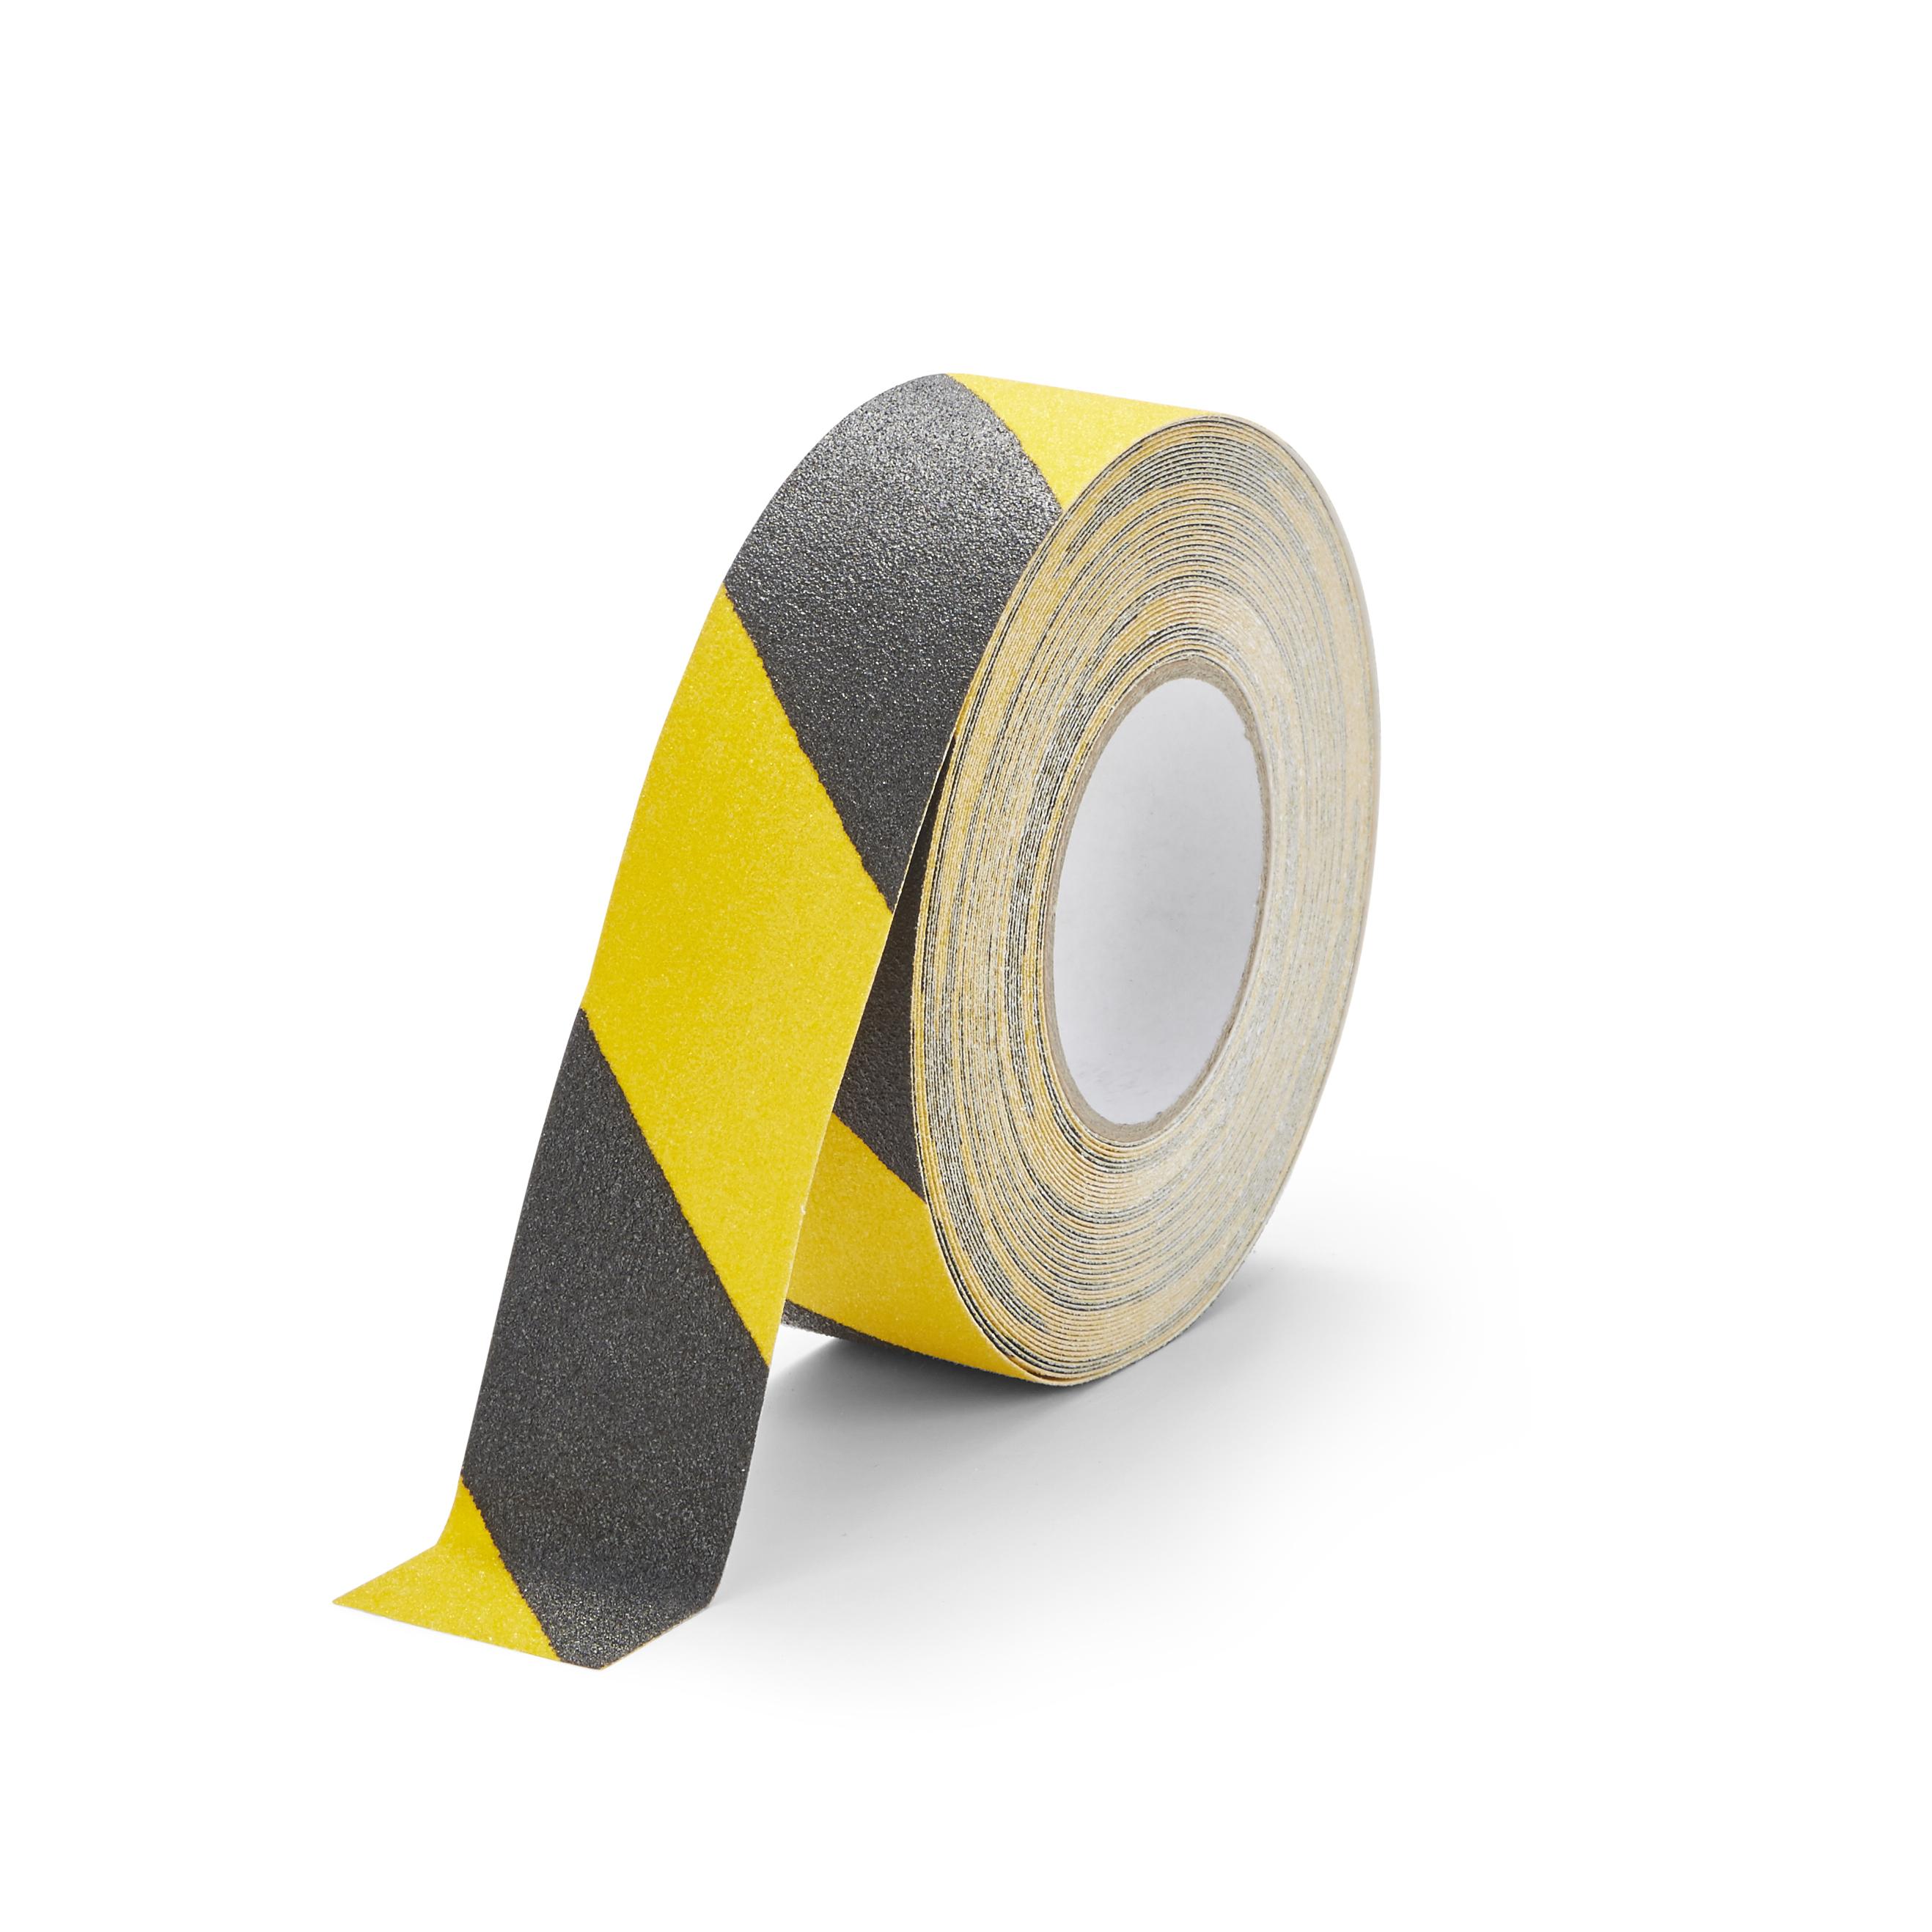 Anti Slip and Handrail Tapes